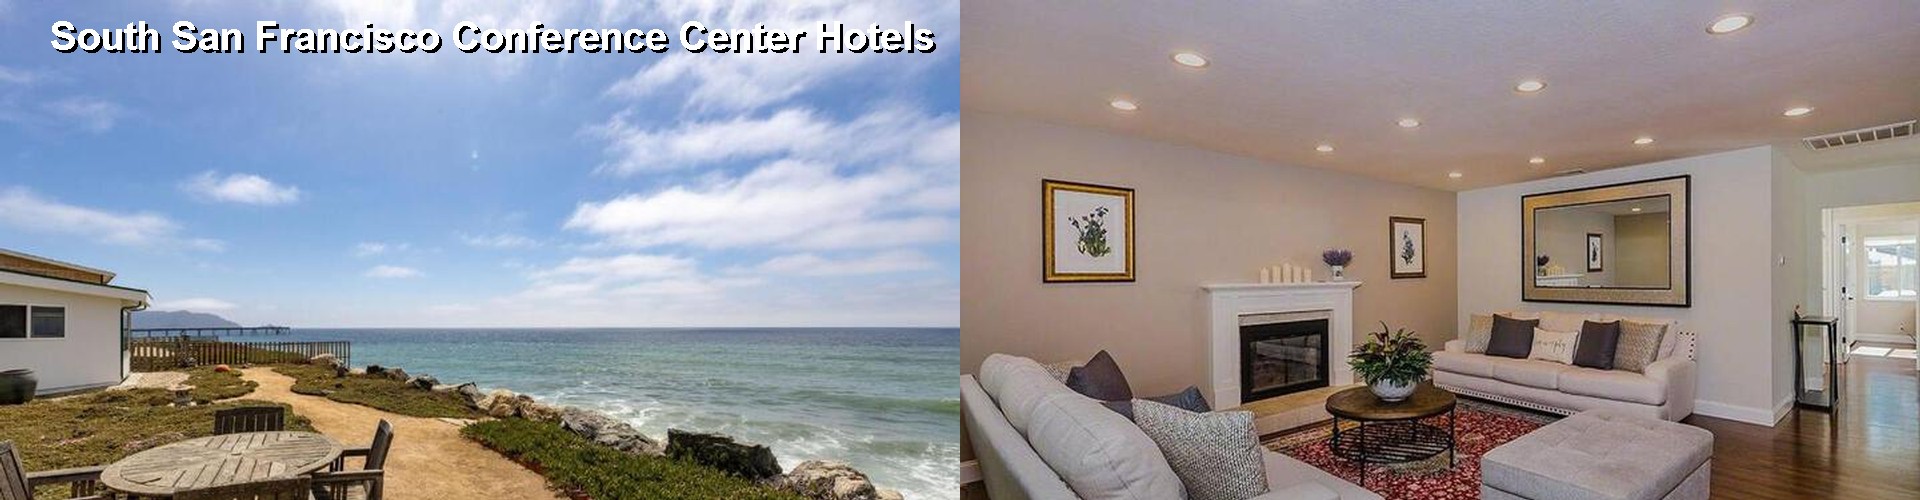 3 Best Hotels near South San Francisco Conference Center